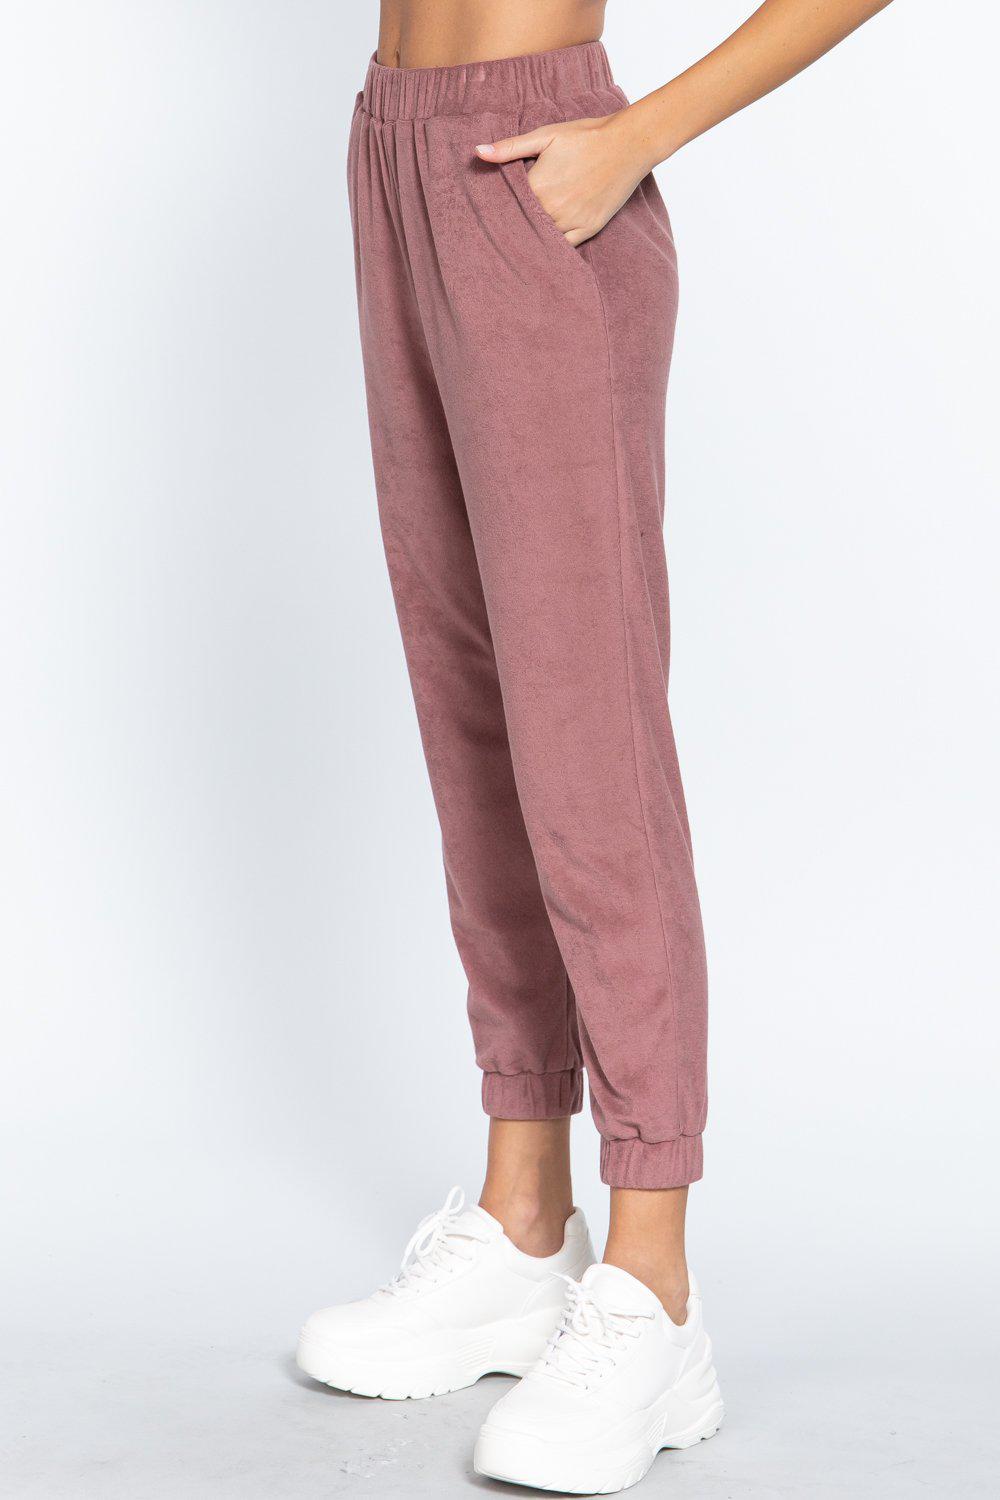 Terry Towelling Long Jogger Pants-[Adult]-[Female]-Blue Zone Planet